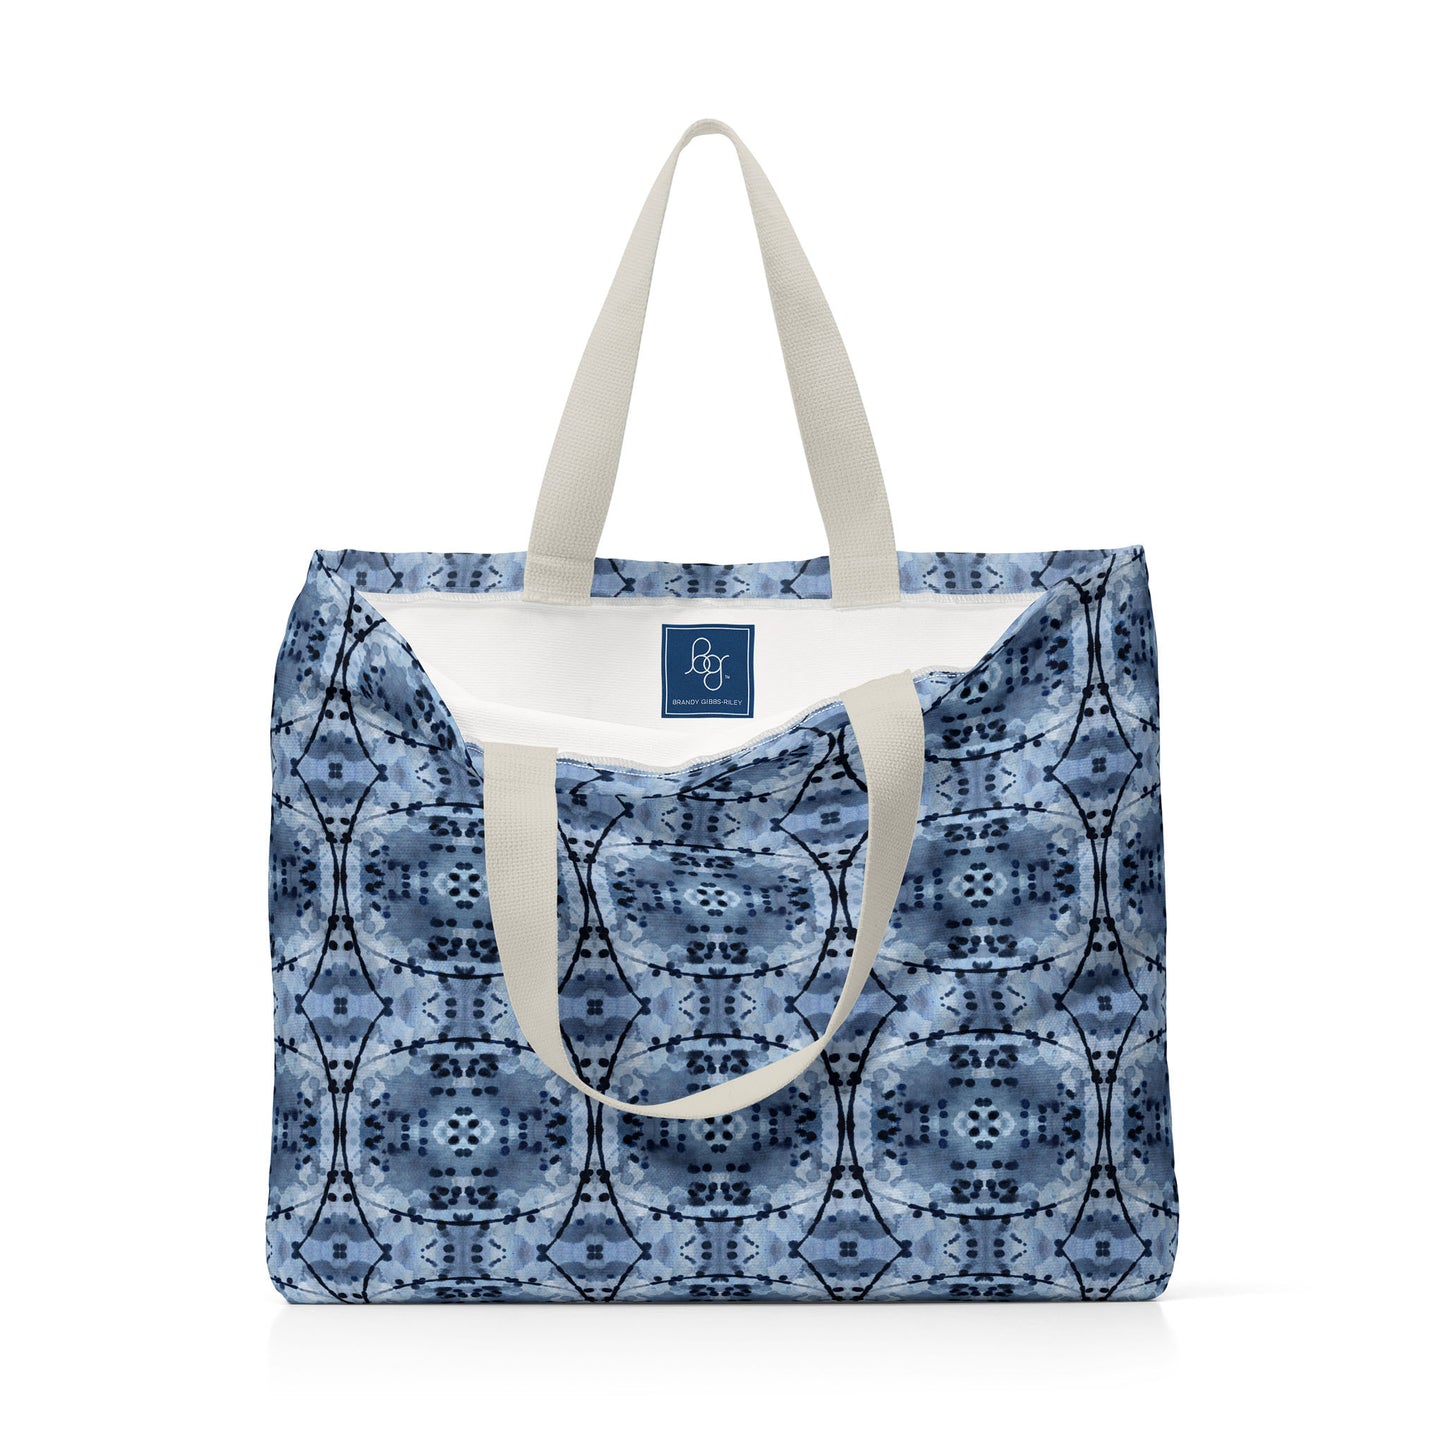 Oversized tote bag featuring an abstract hand-painted blue and black pattern and blue label